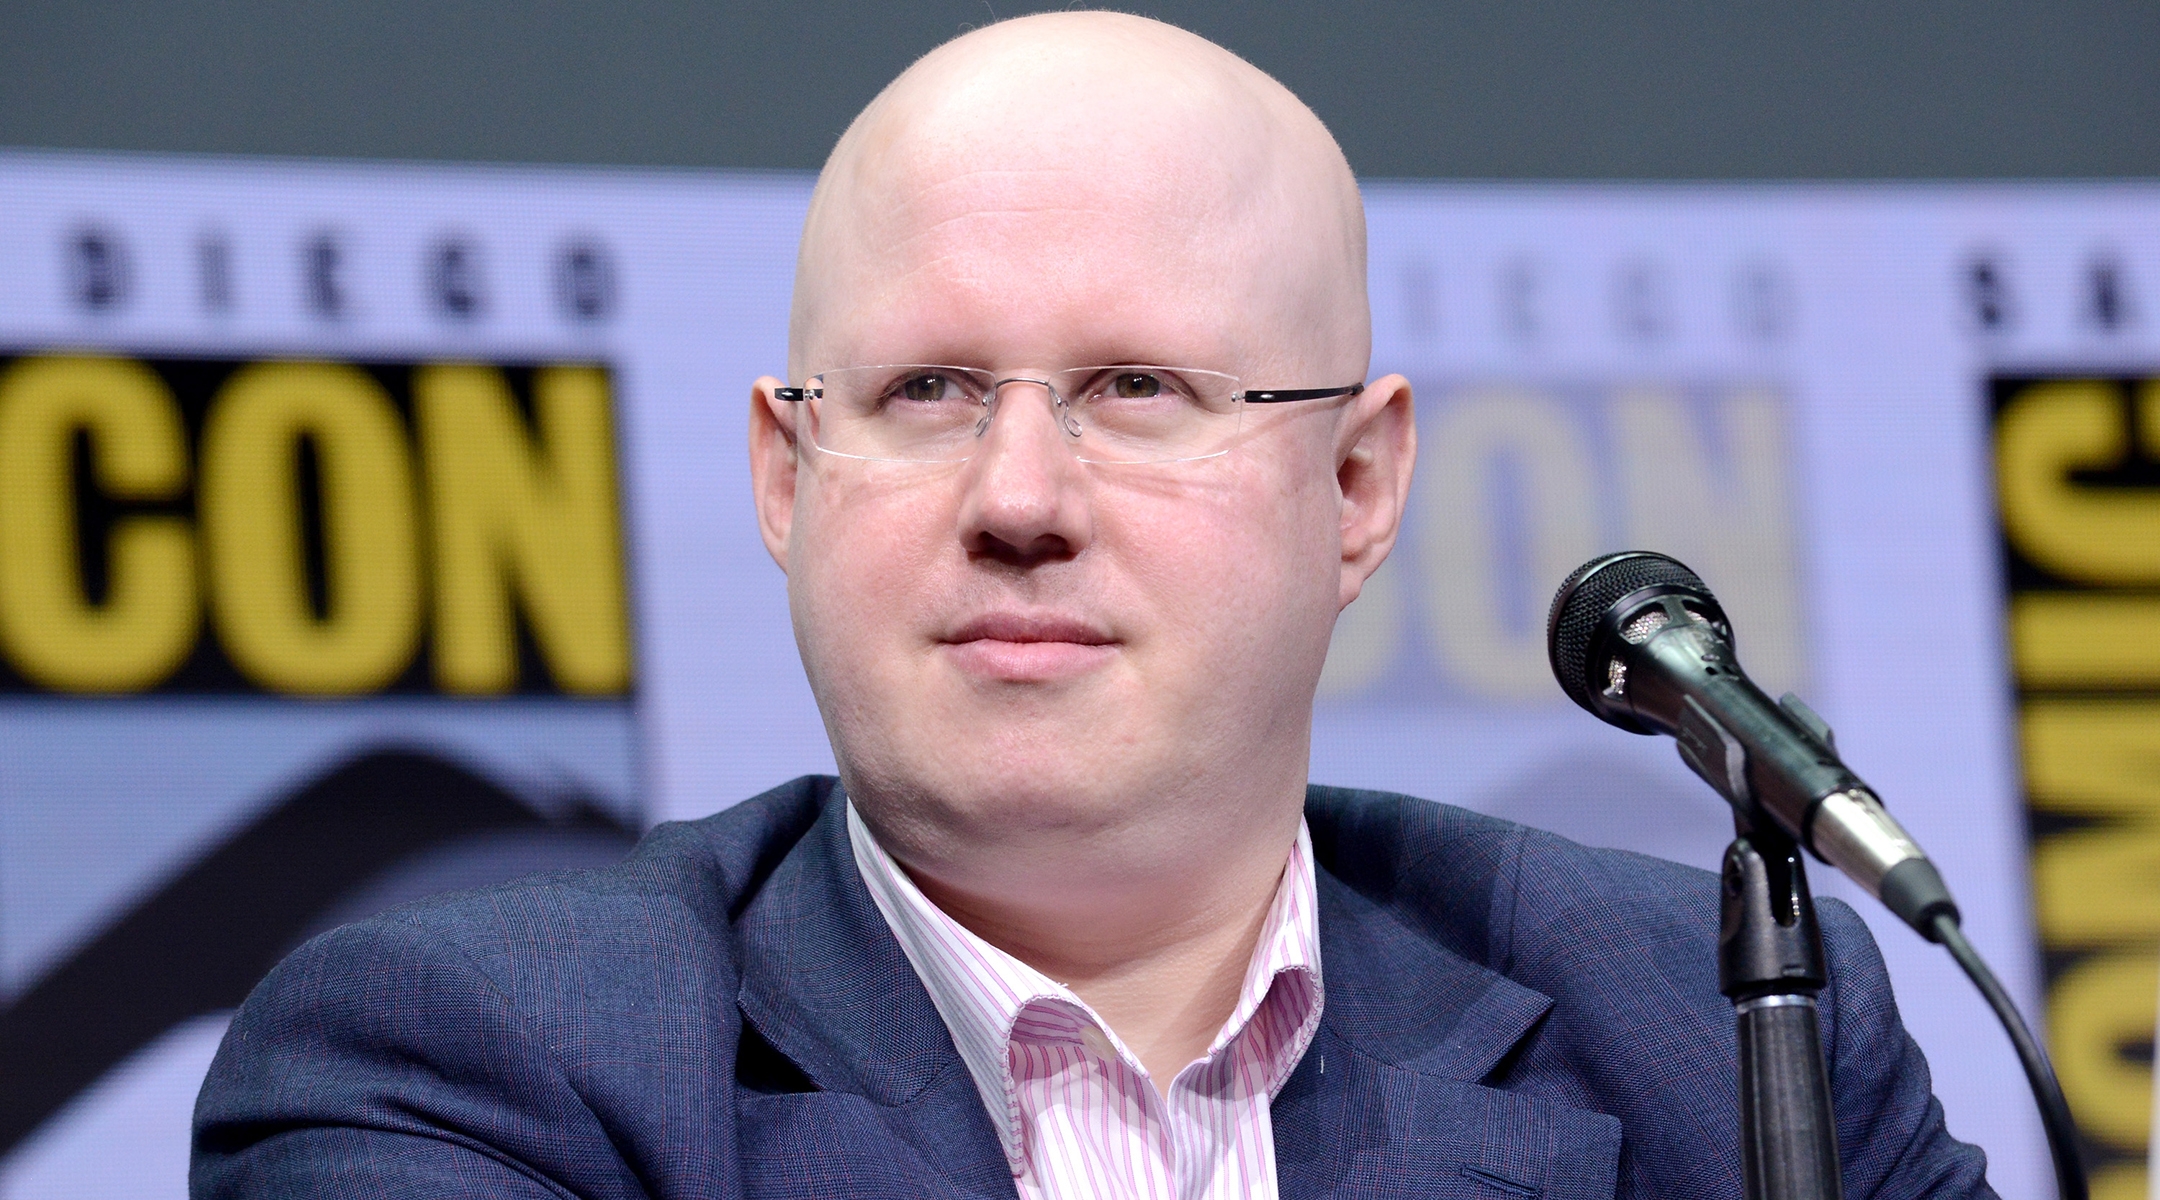 Matt Lucas at a “Doctor Who” BBC America official panel during Comic-Con in San Diego, July 23, 2017. (Albert L. Ortega/Getty Images)